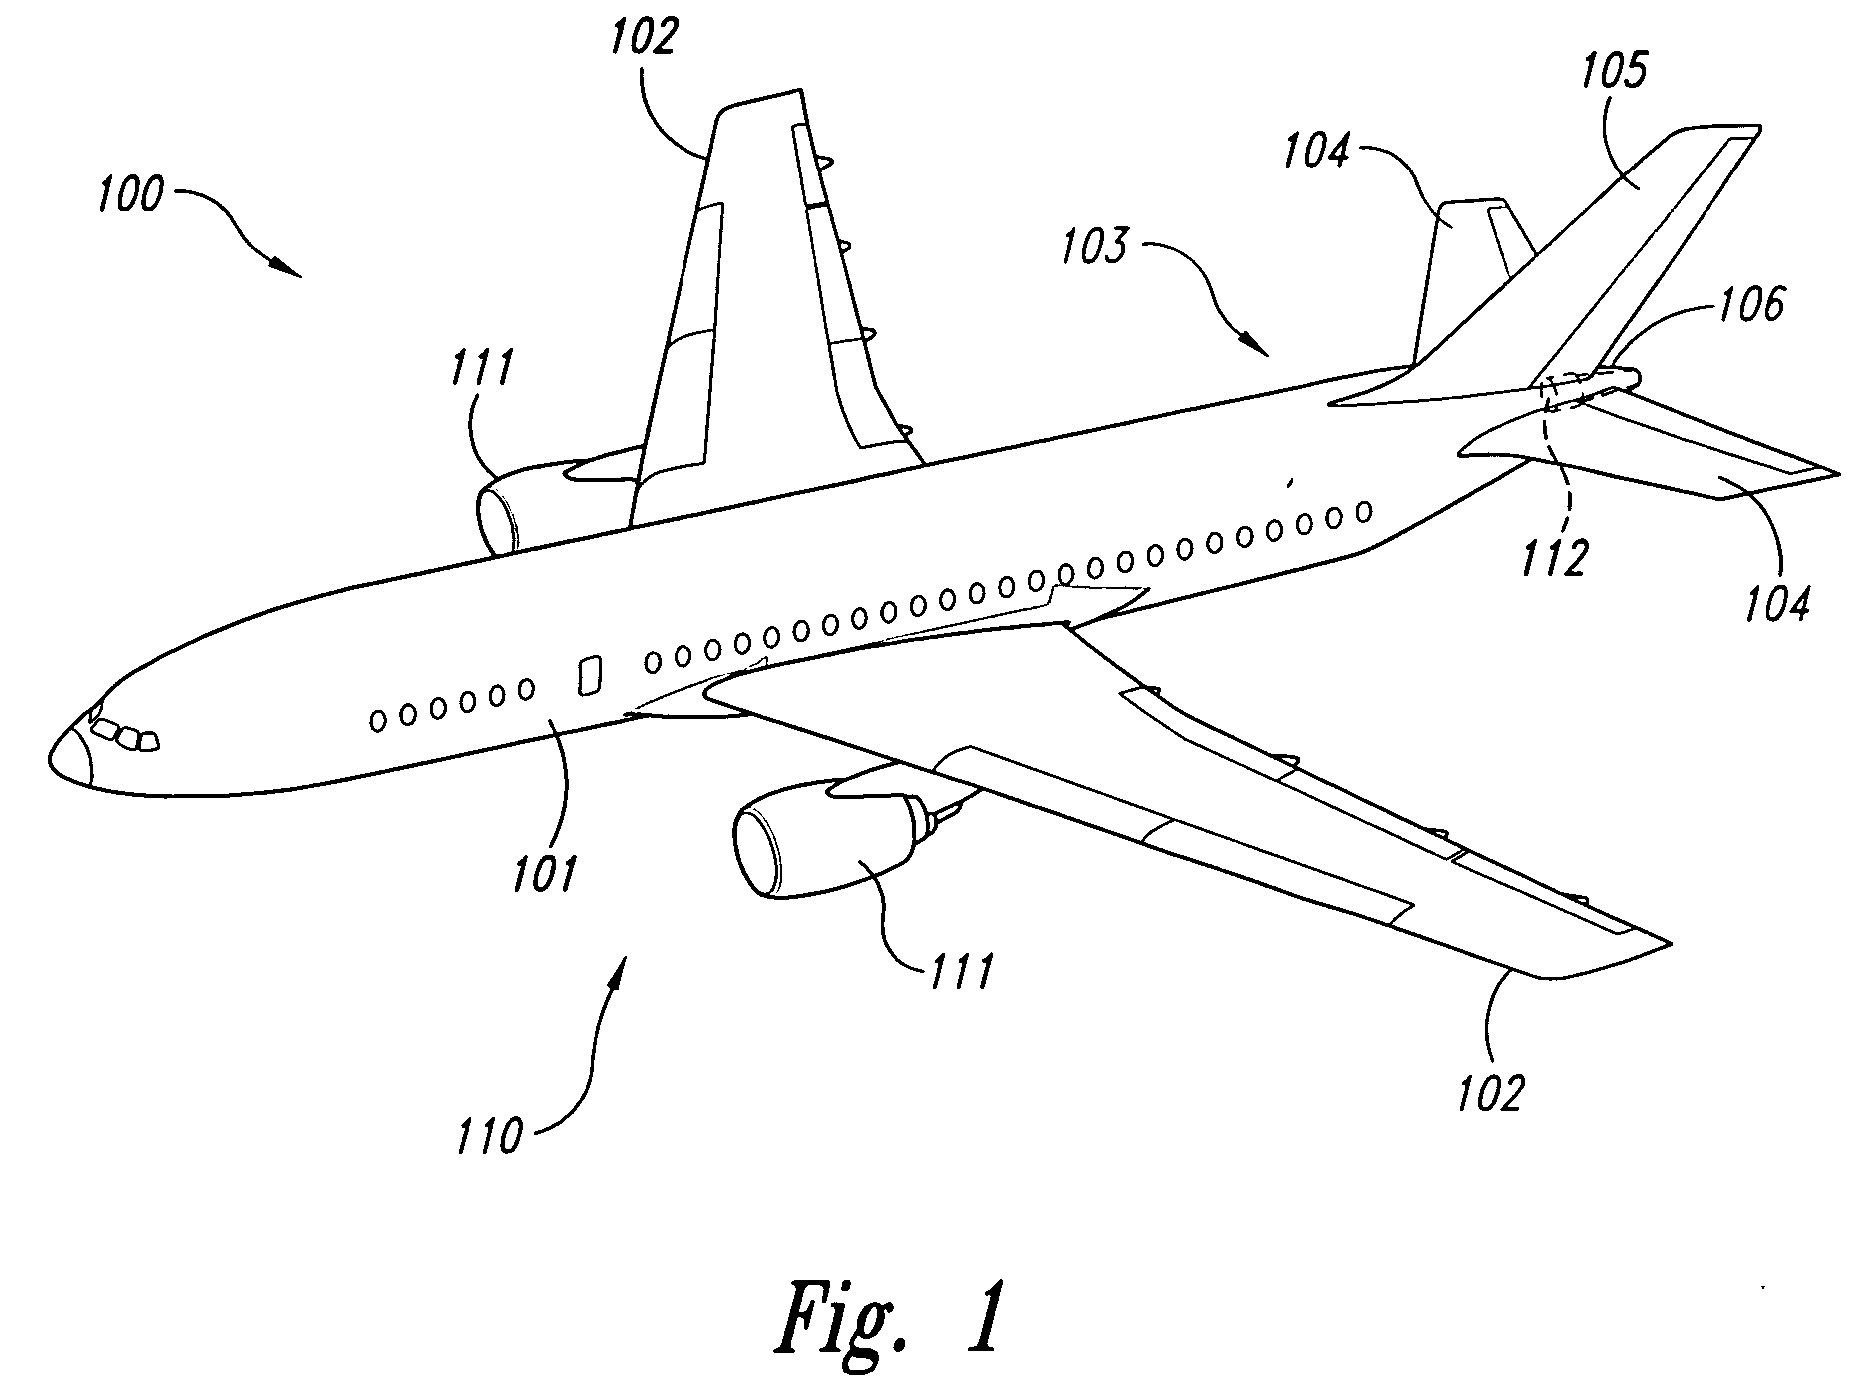 Systems and methods for starting aircraft engines